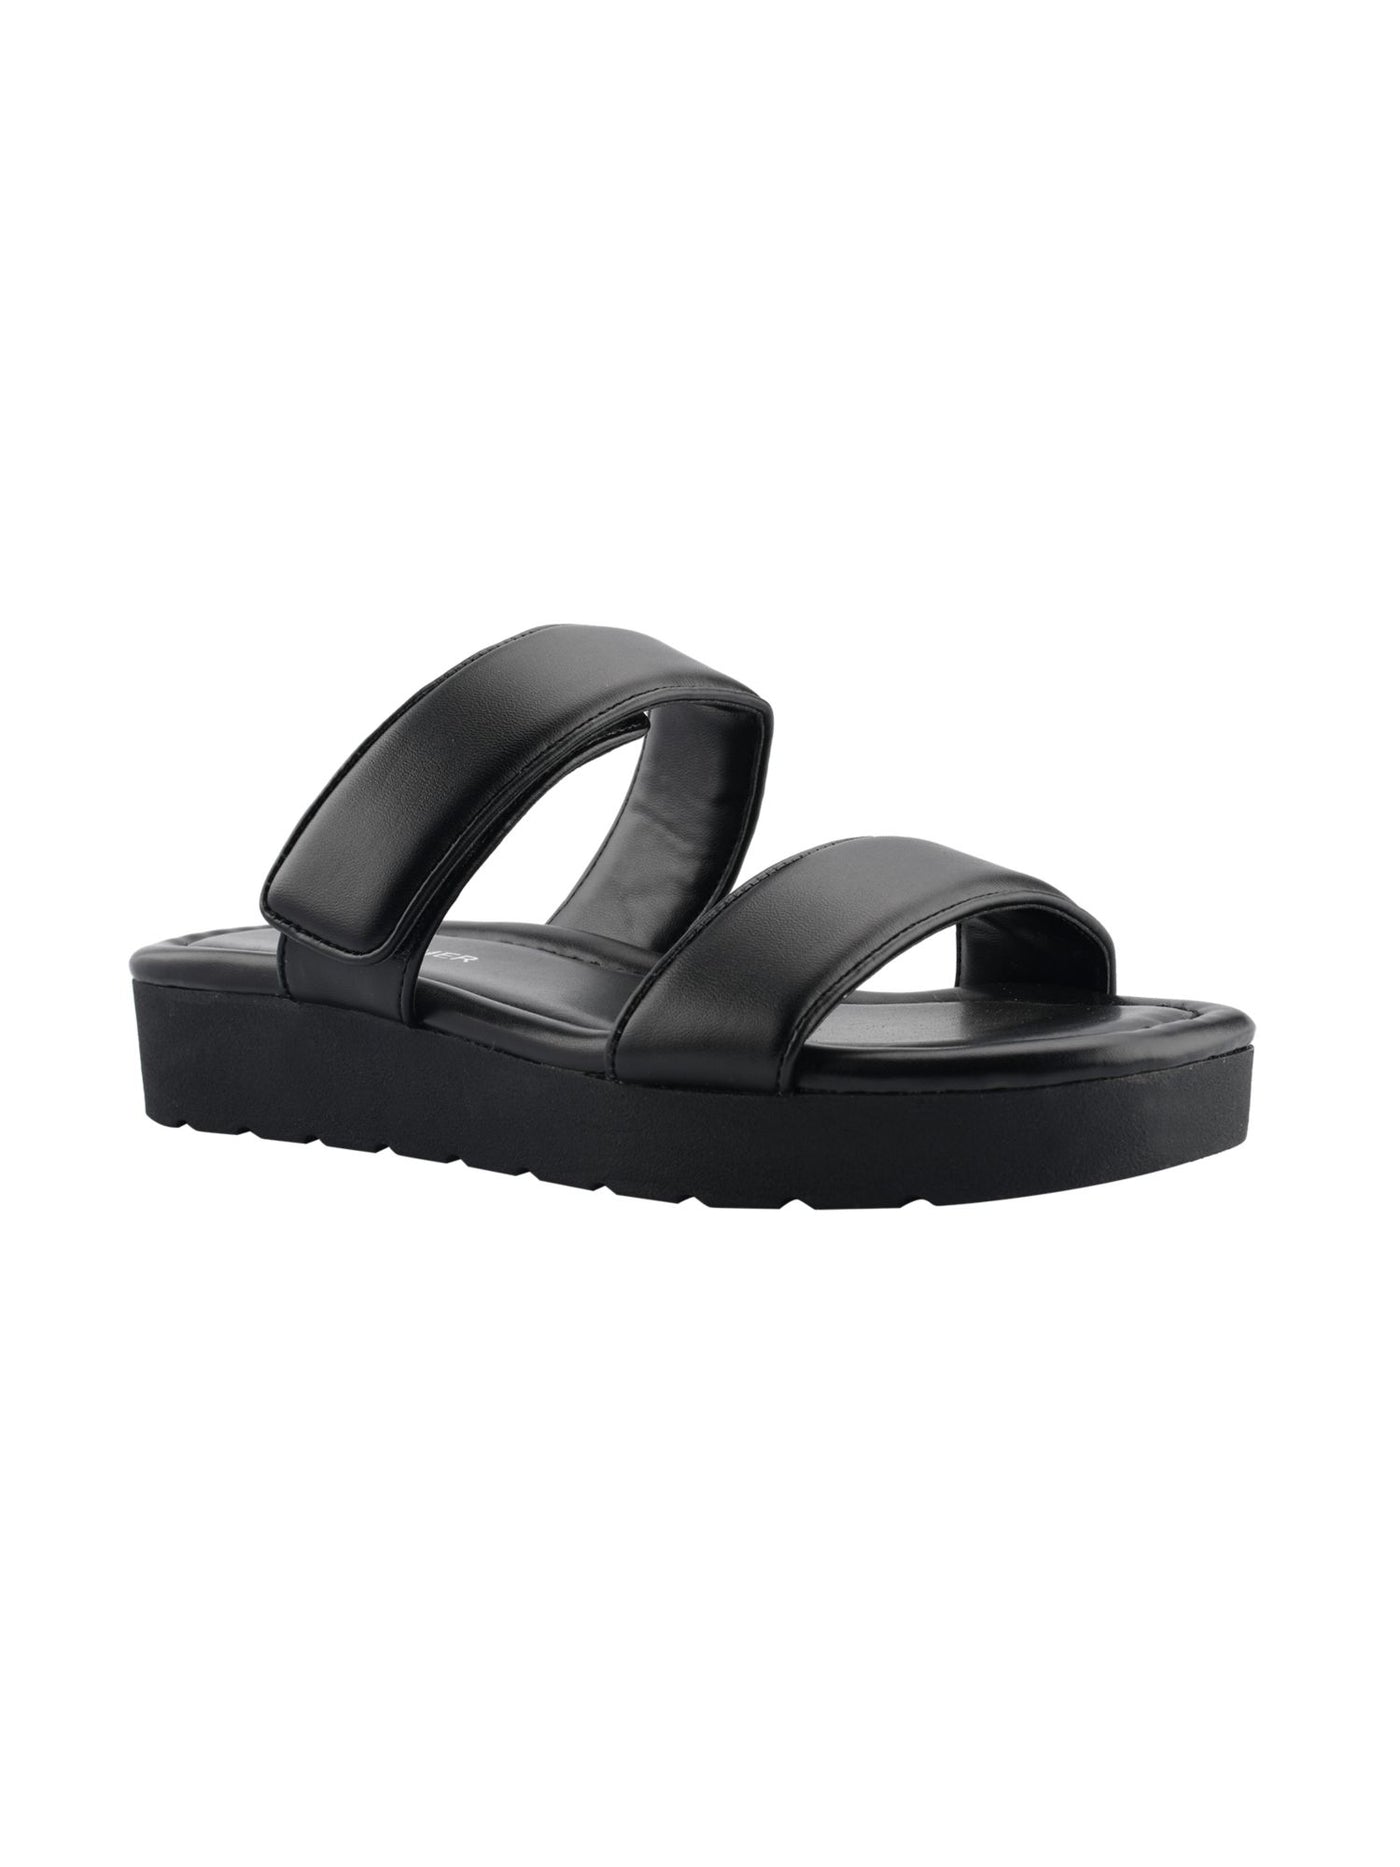 MARC FISHER Womens Black Double Strap Cushioned Kina Round Toe Sandals 6.5 M